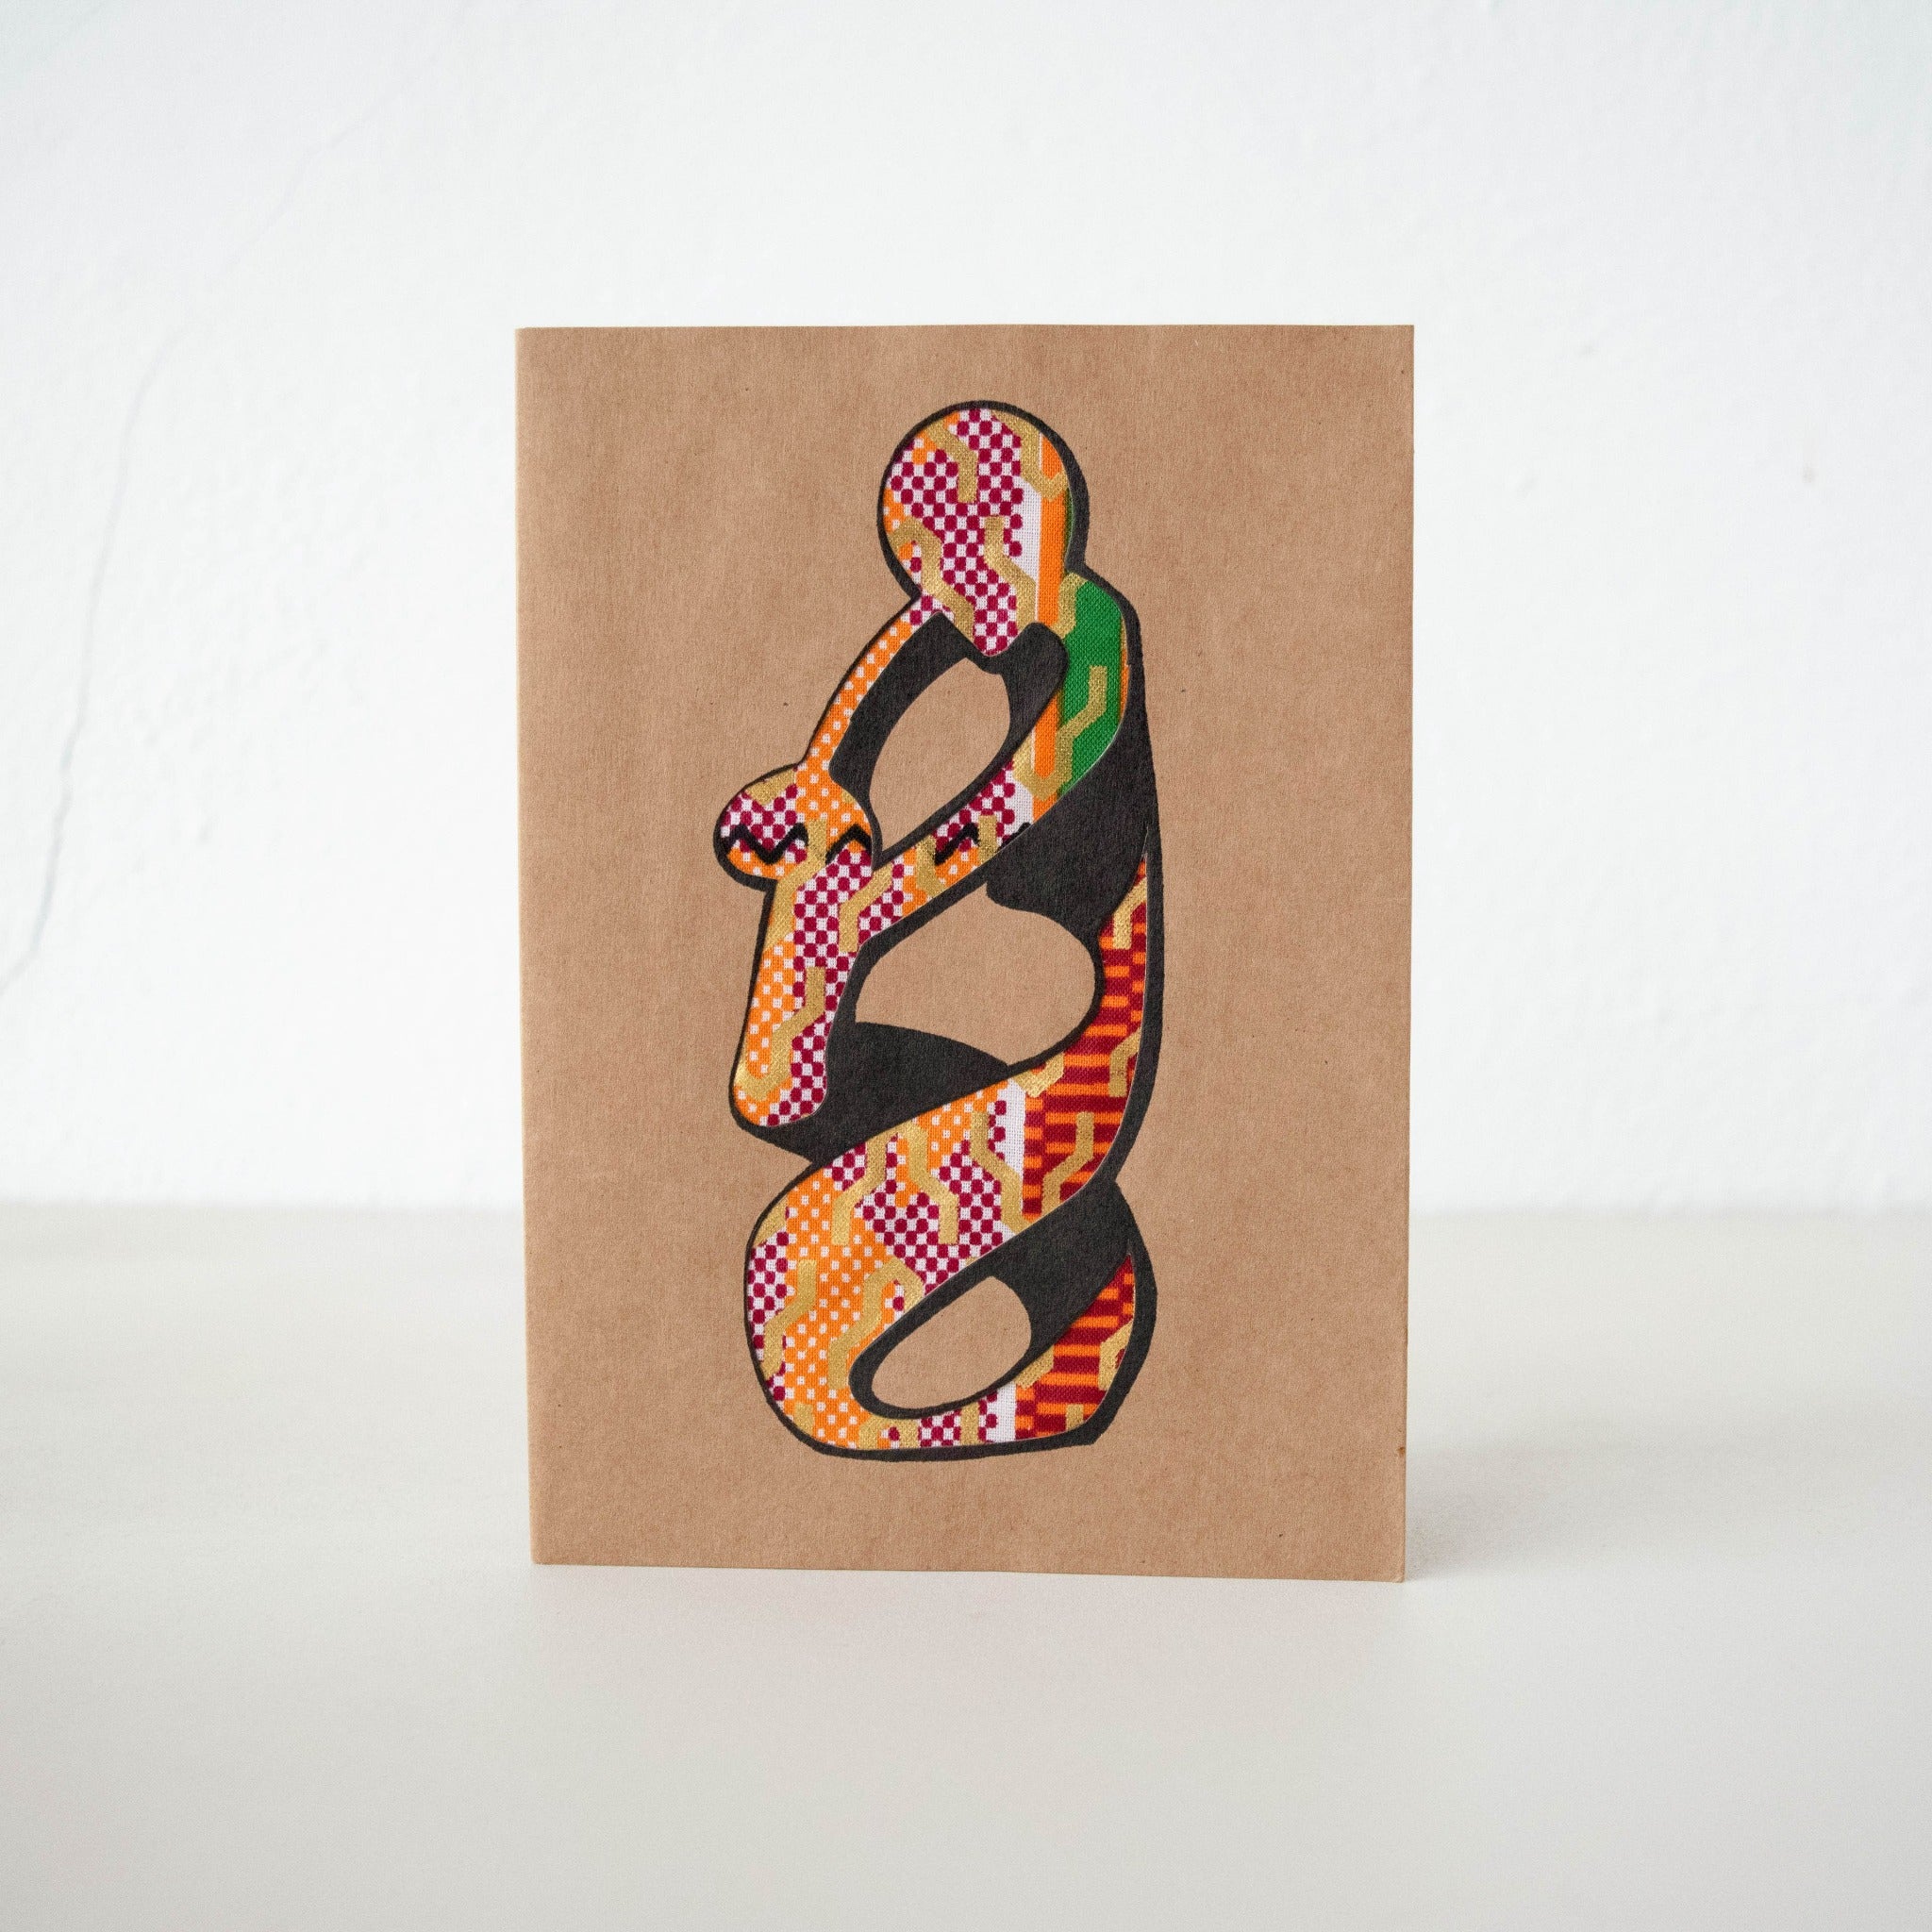 Loving Mother Card - Kenyan materials and design for a fair trade boutique